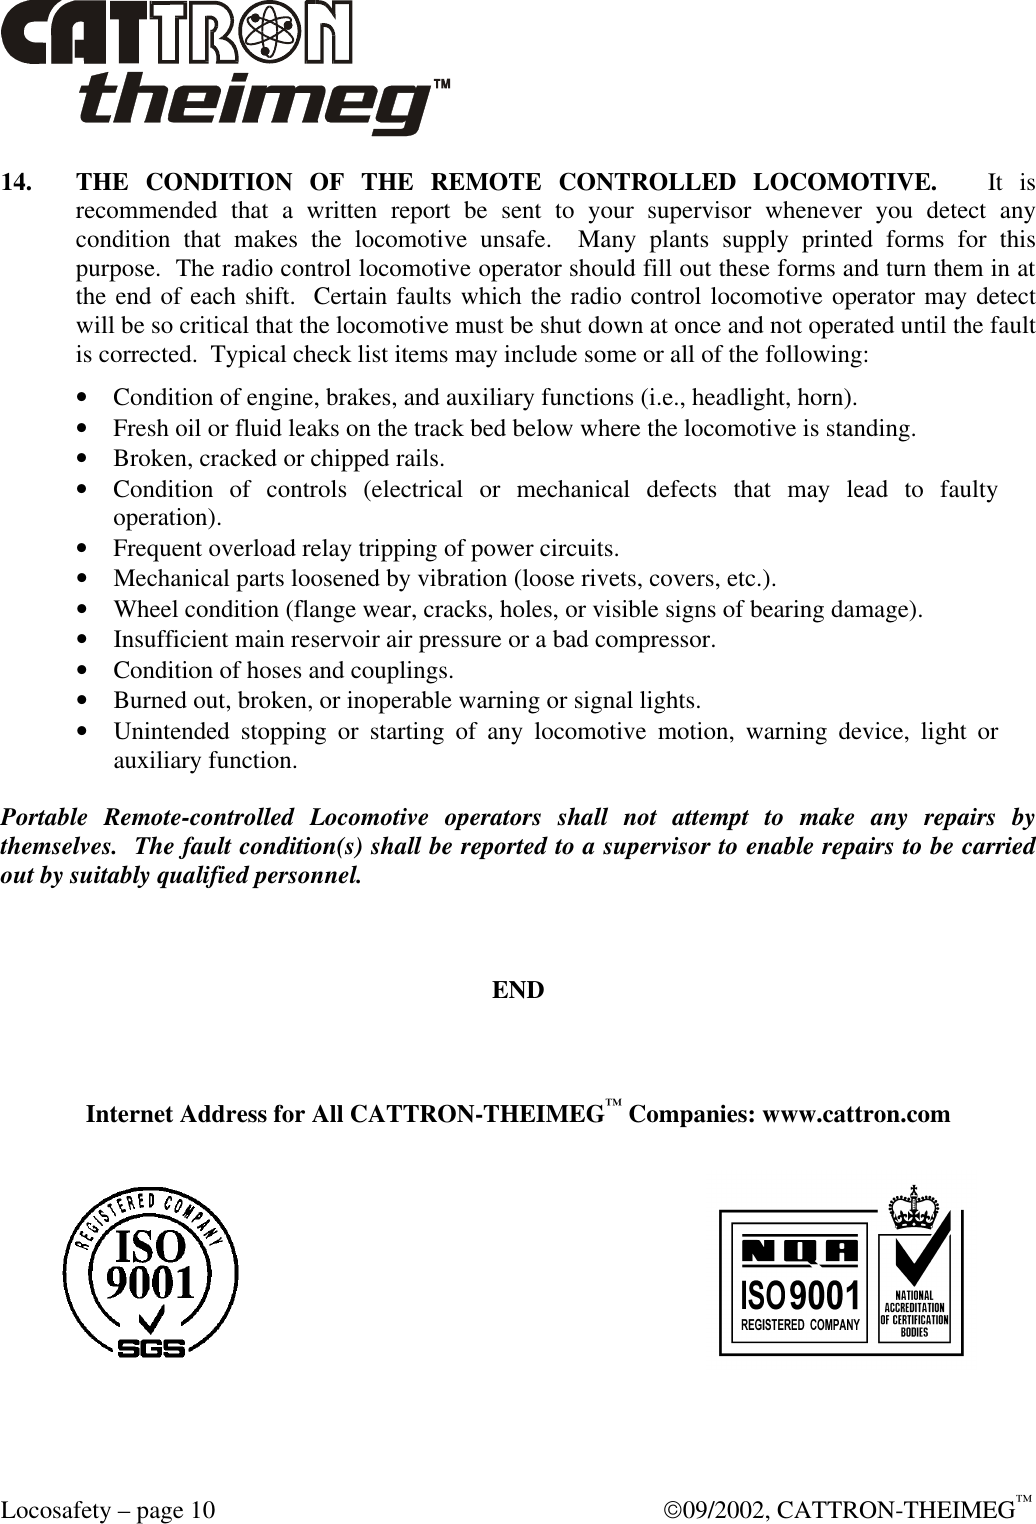  Locosafety – page 10  09/2002, CATTRON-THEIMEG™ 14. THE CONDITION OF THE REMOTE CONTROLLED LOCOMOTIVE.   It is recommended that a written report be sent to your supervisor whenever you detect any condition that makes the locomotive unsafe.  Many plants supply printed forms for this purpose.  The radio control locomotive operator should fill out these forms and turn them in at the end of each shift.  Certain faults which the radio control locomotive operator may detect will be so critical that the locomotive must be shut down at once and not operated until the fault is corrected.  Typical check list items may include some or all of the following: • Condition of engine, brakes, and auxiliary functions (i.e., headlight, horn). • Fresh oil or fluid leaks on the track bed below where the locomotive is standing. • Broken, cracked or chipped rails. • Condition of controls (electrical or mechanical defects that may lead to faulty operation). • Frequent overload relay tripping of power circuits. • Mechanical parts loosened by vibration (loose rivets, covers, etc.). • Wheel condition (flange wear, cracks, holes, or visible signs of bearing damage). • Insufficient main reservoir air pressure or a bad compressor. • Condition of hoses and couplings. • Burned out, broken, or inoperable warning or signal lights. • Unintended stopping or starting of any locomotive motion, warning device, light or auxiliary function.  Portable Remote-controlled Locomotive operators shall not attempt to make any repairs by themselves.  The fault condition(s) shall be reported to a supervisor to enable repairs to be carried out by suitably qualified personnel.    END   Internet Address for All CATTRON-THEIMEG™ Companies: www.cattron.com   